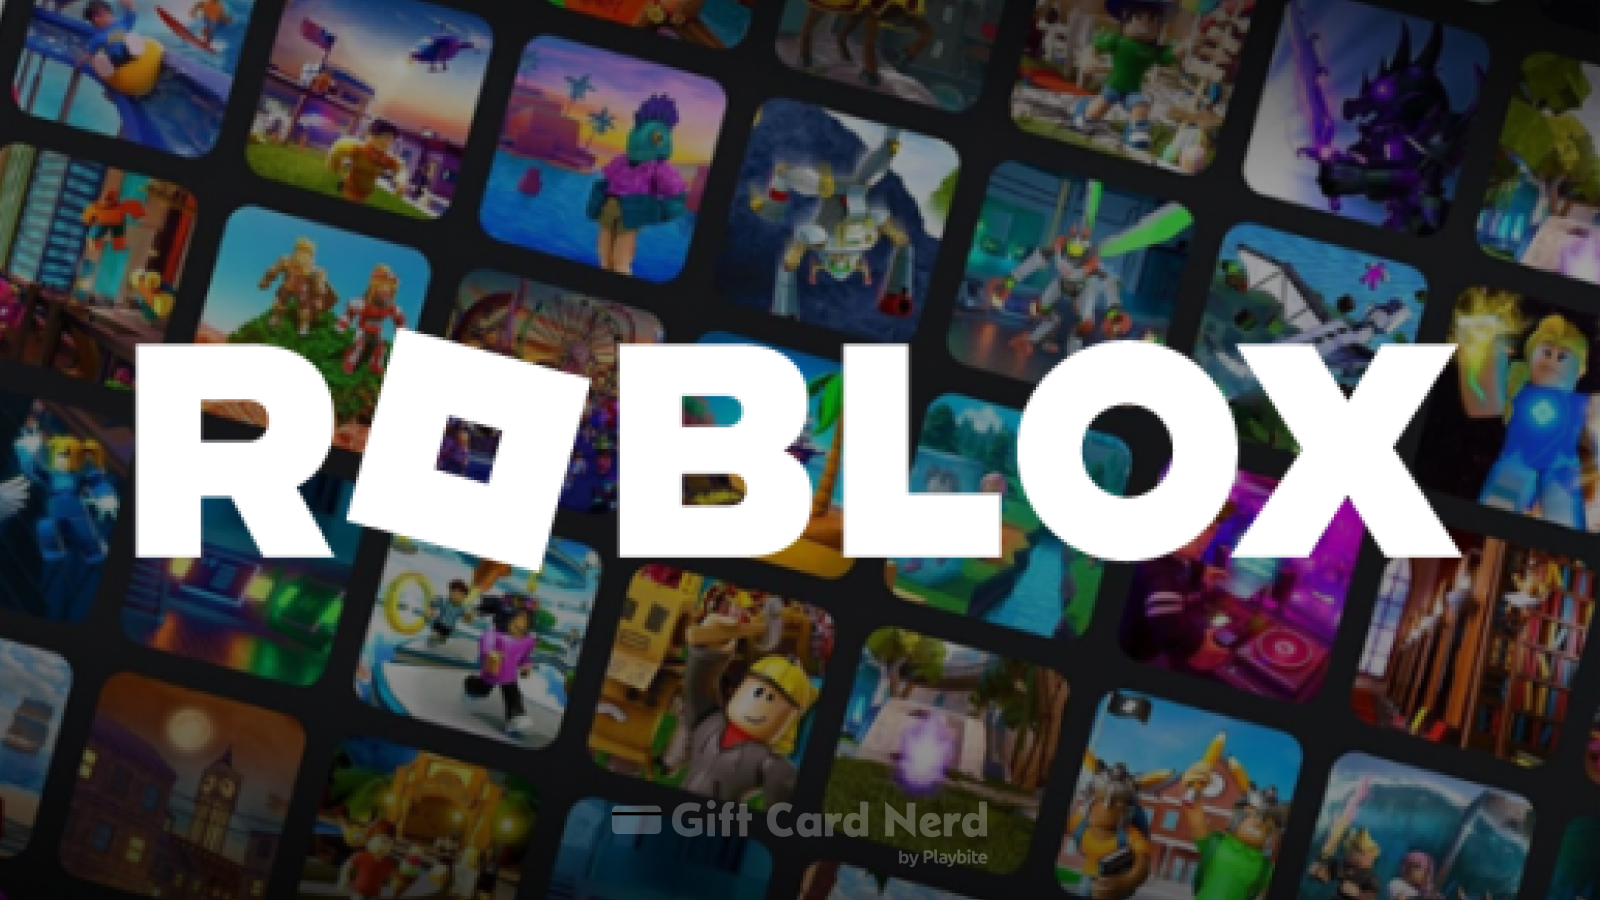 Can I Use a Roblox Gift Card on Roblox?